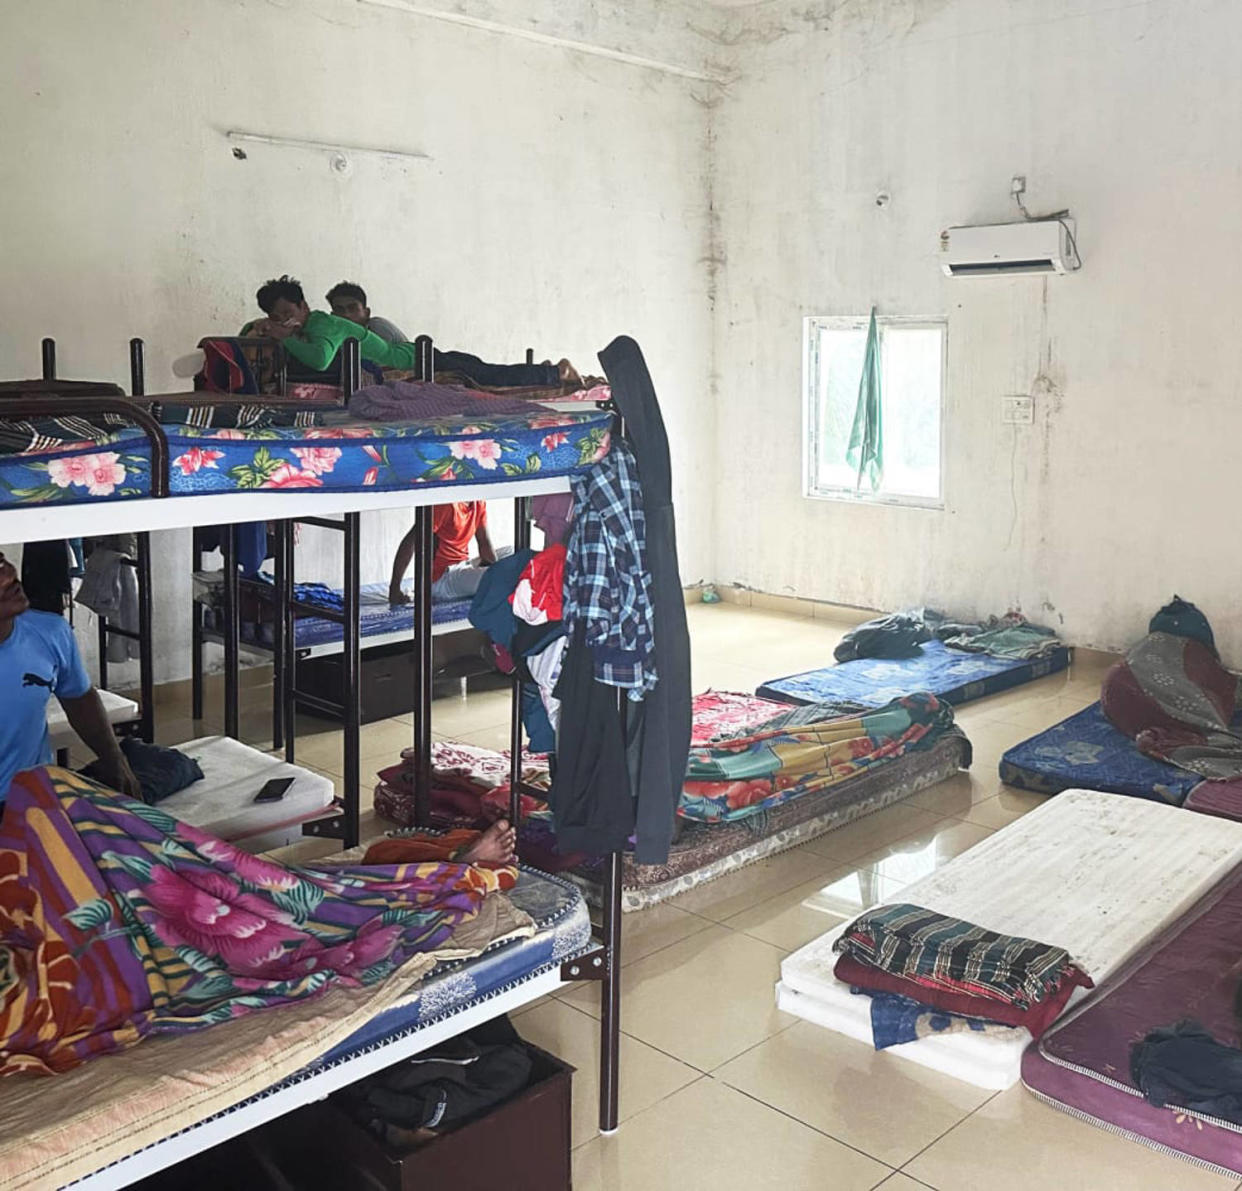 A room where Farinella said he found migrant workers sleeping on mattresses laid out on the floor, many without pillows or bedding. (Courtesy Joshua Farinella)